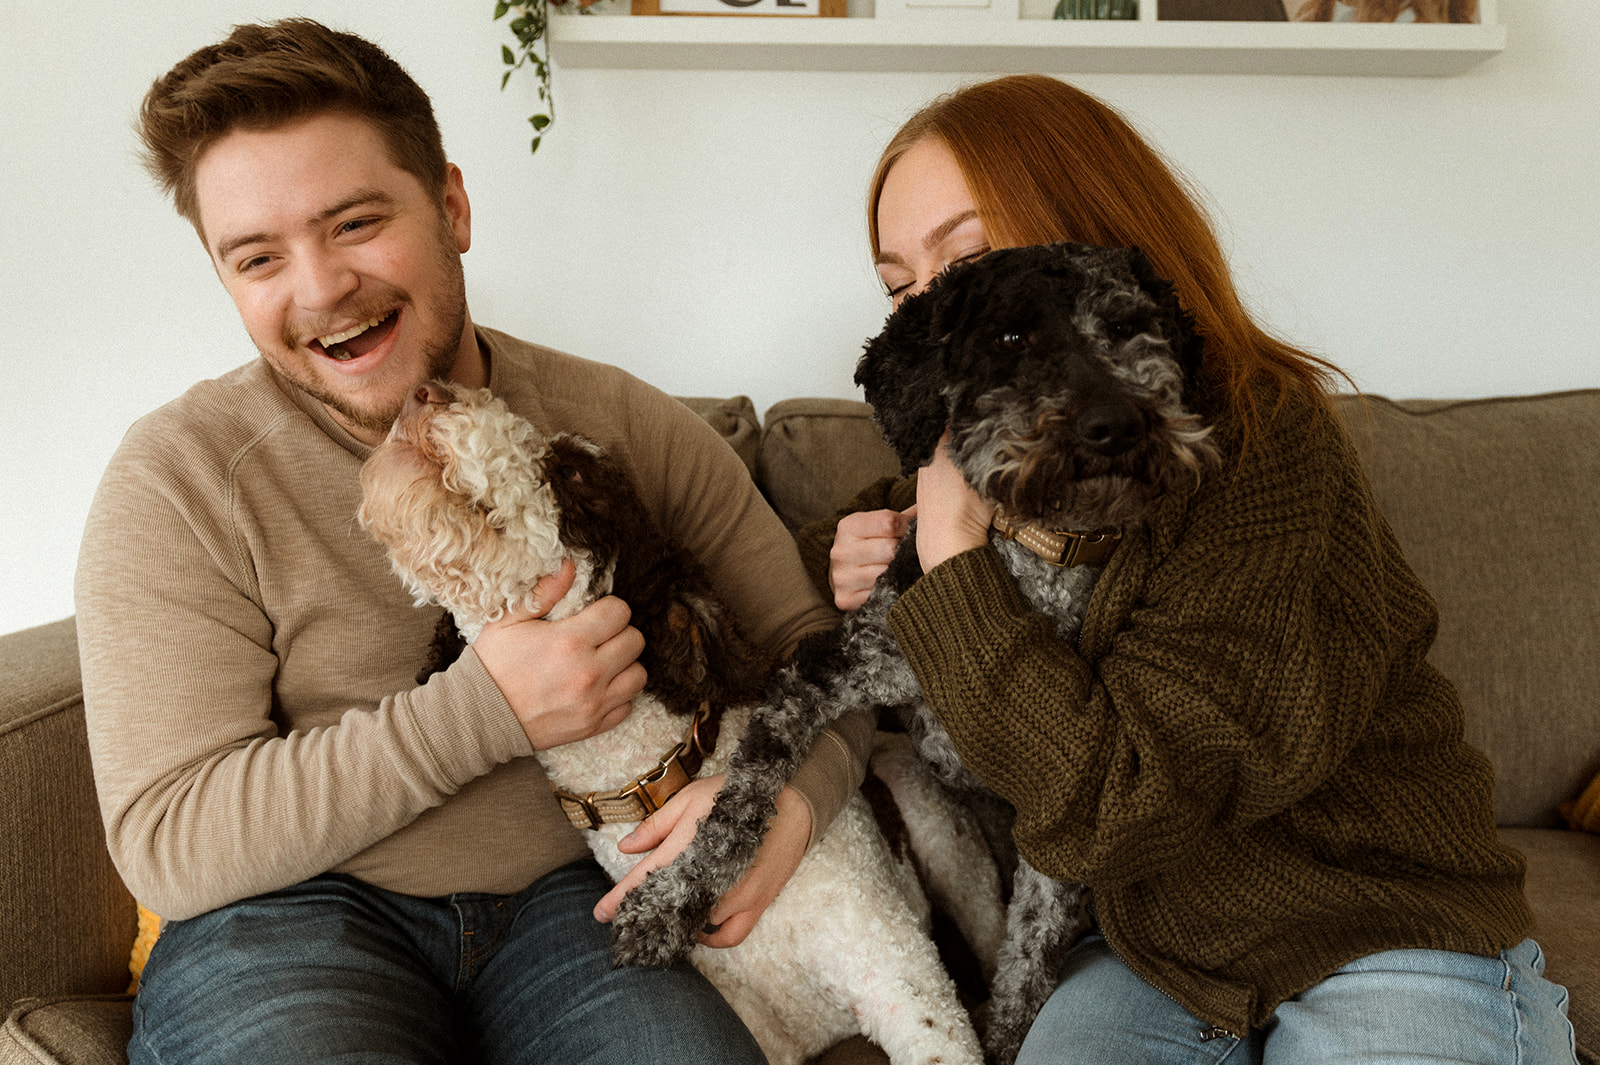 In-home couples session with their fur babies!